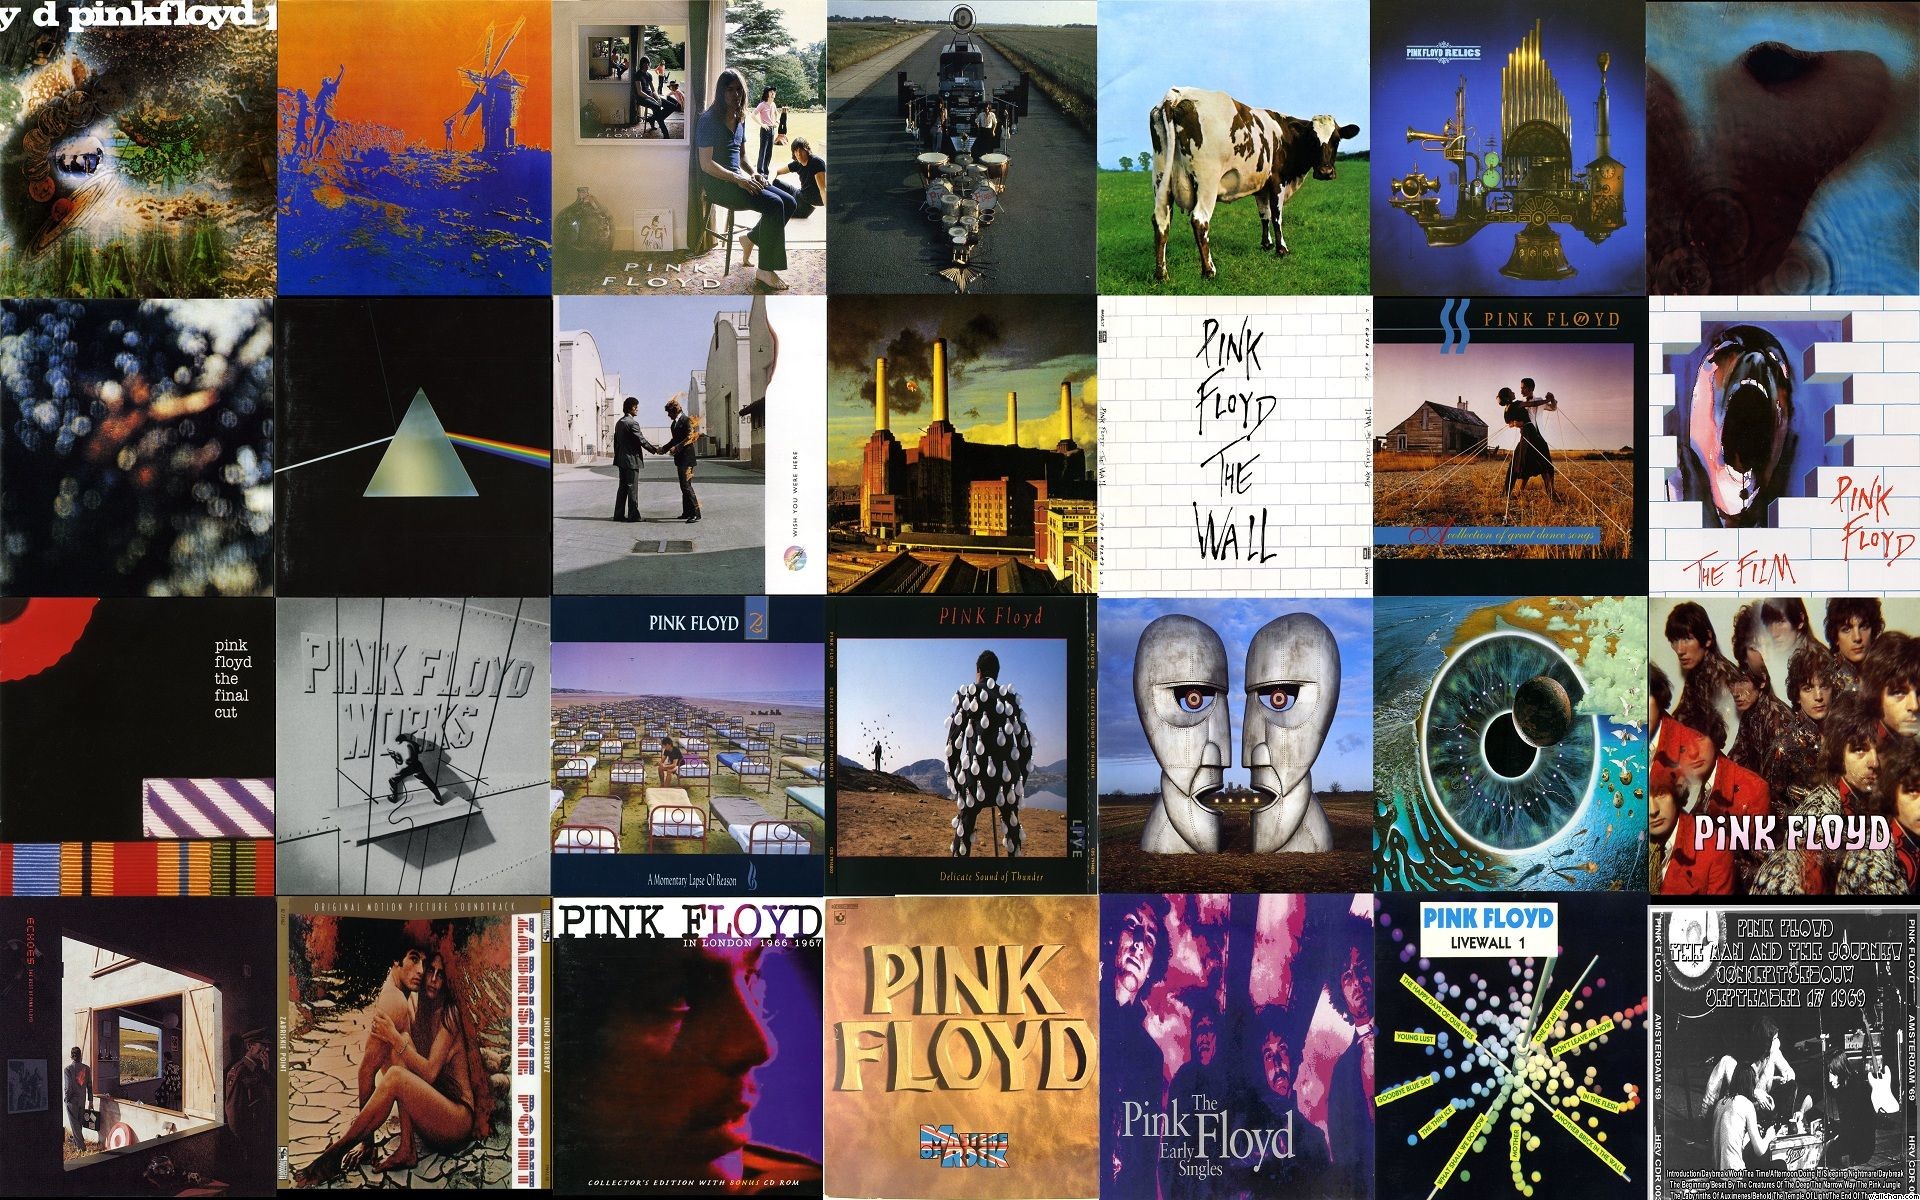 Data-src - Pink Floyd All Albums Covers - HD Wallpaper 